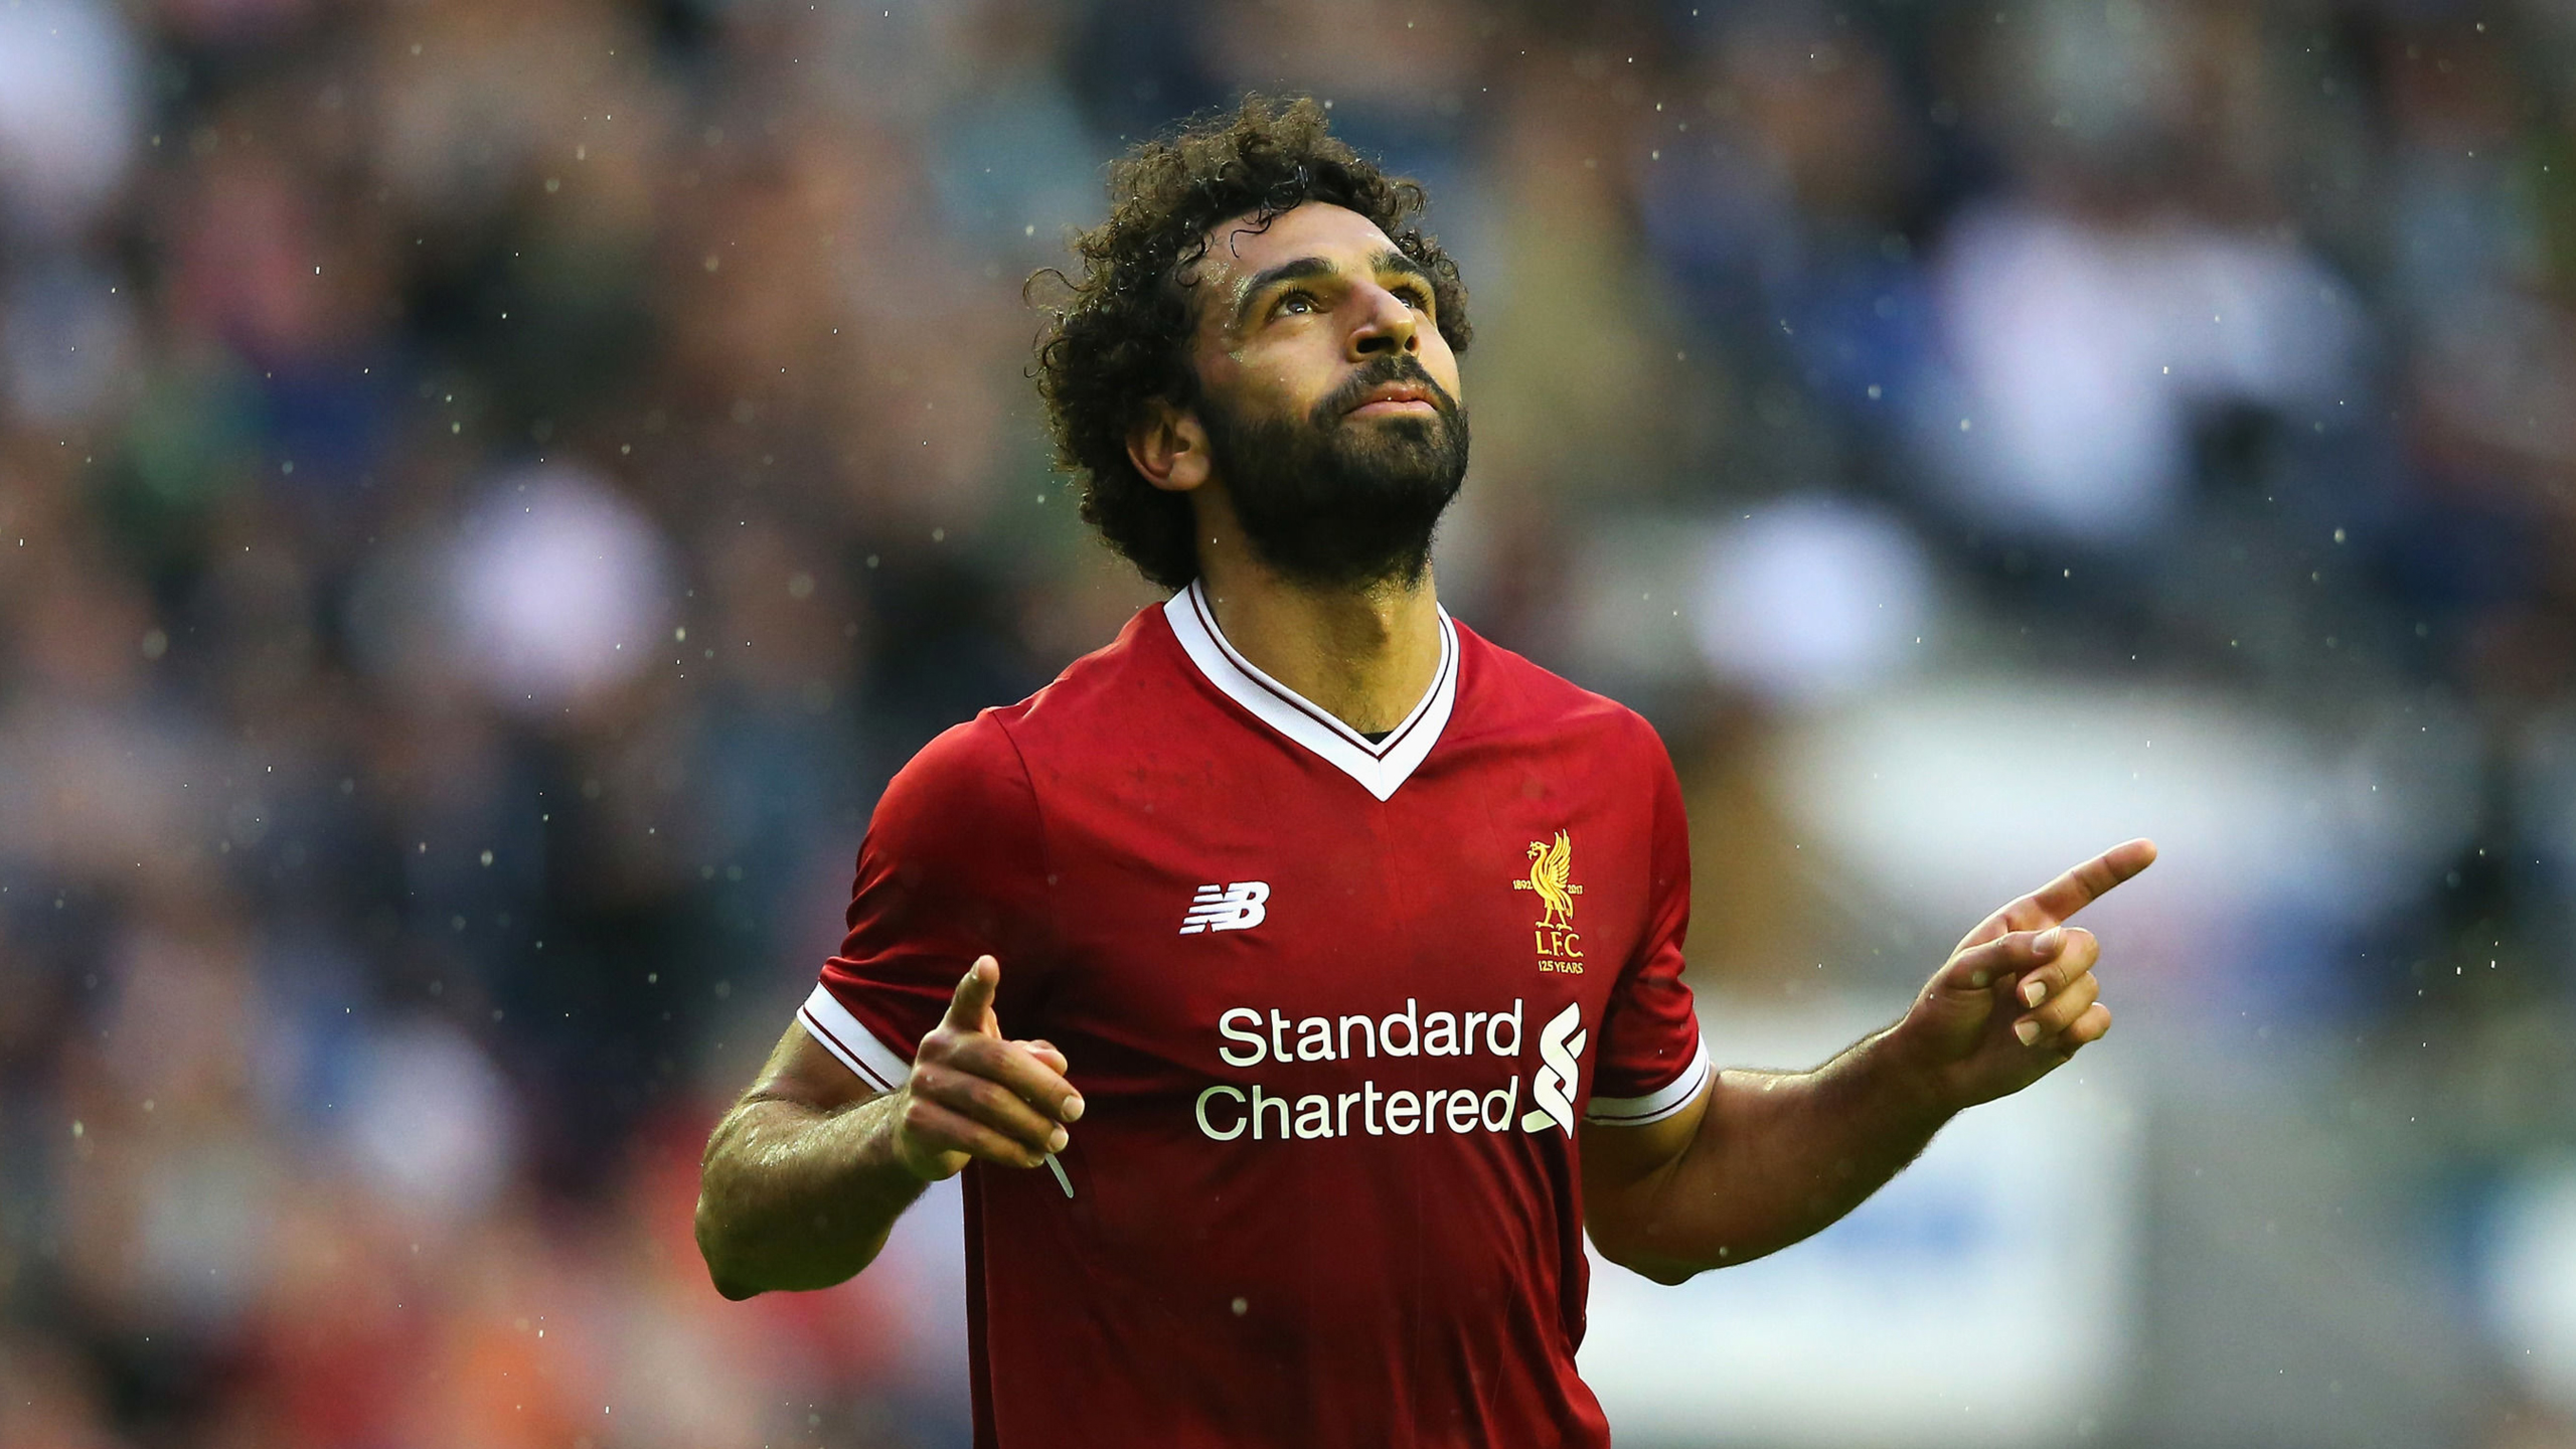 7680x4320 Mohamed Salah Liverpool And Egyptian Football Player 8K Wallpaper,  HD Sports 4K Wallpapers, Images, Photos and Background - Wallpapers Den